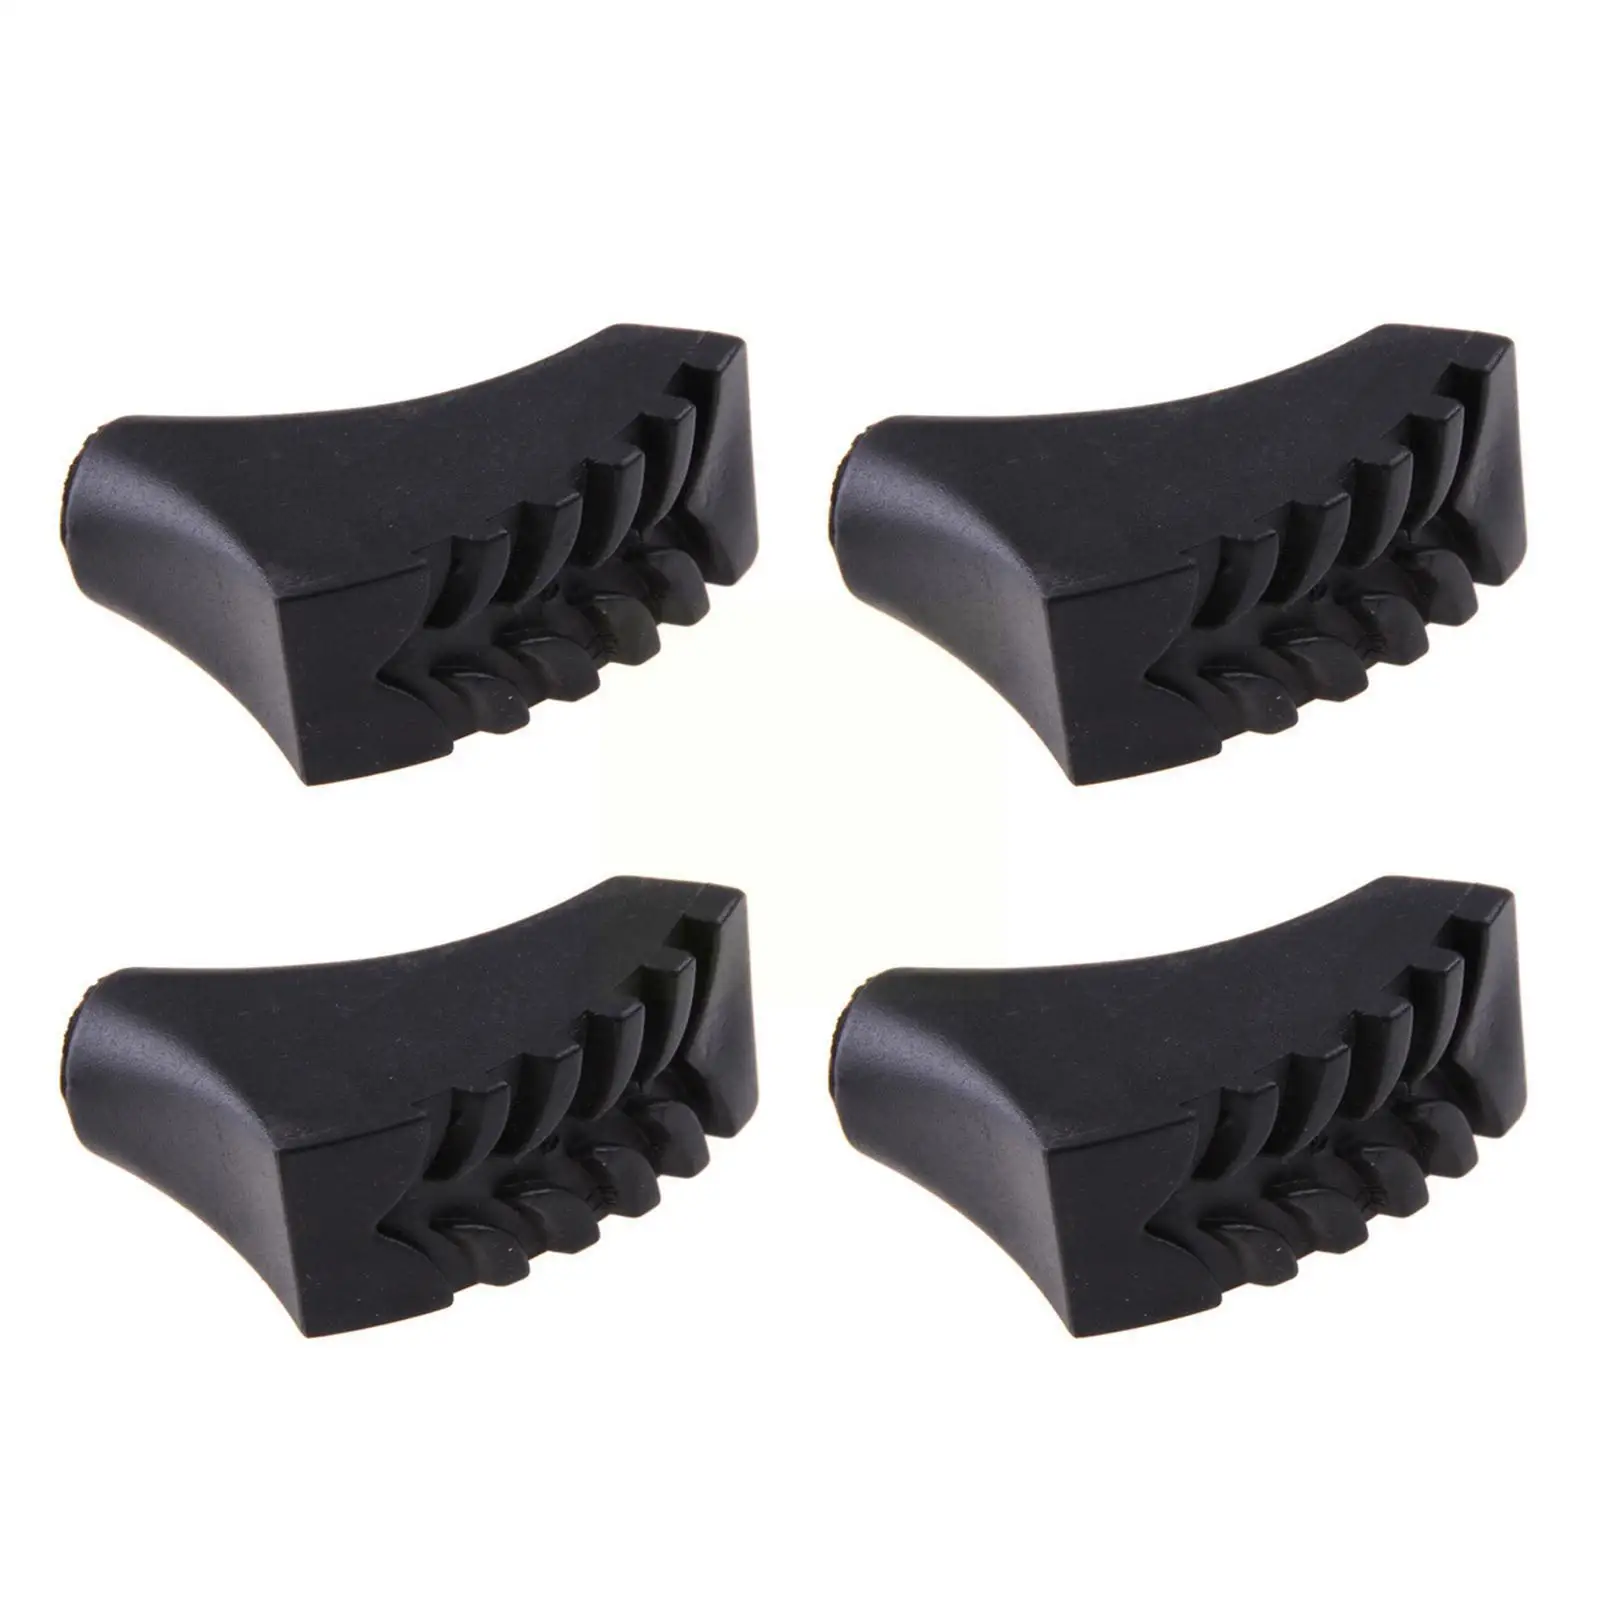 

Black Rubber Boot Tips Walking Pole Trekking Pole Tip Protectors Rubber Pads Buffer Replacement Tips End For Hiking Stick W2Q2